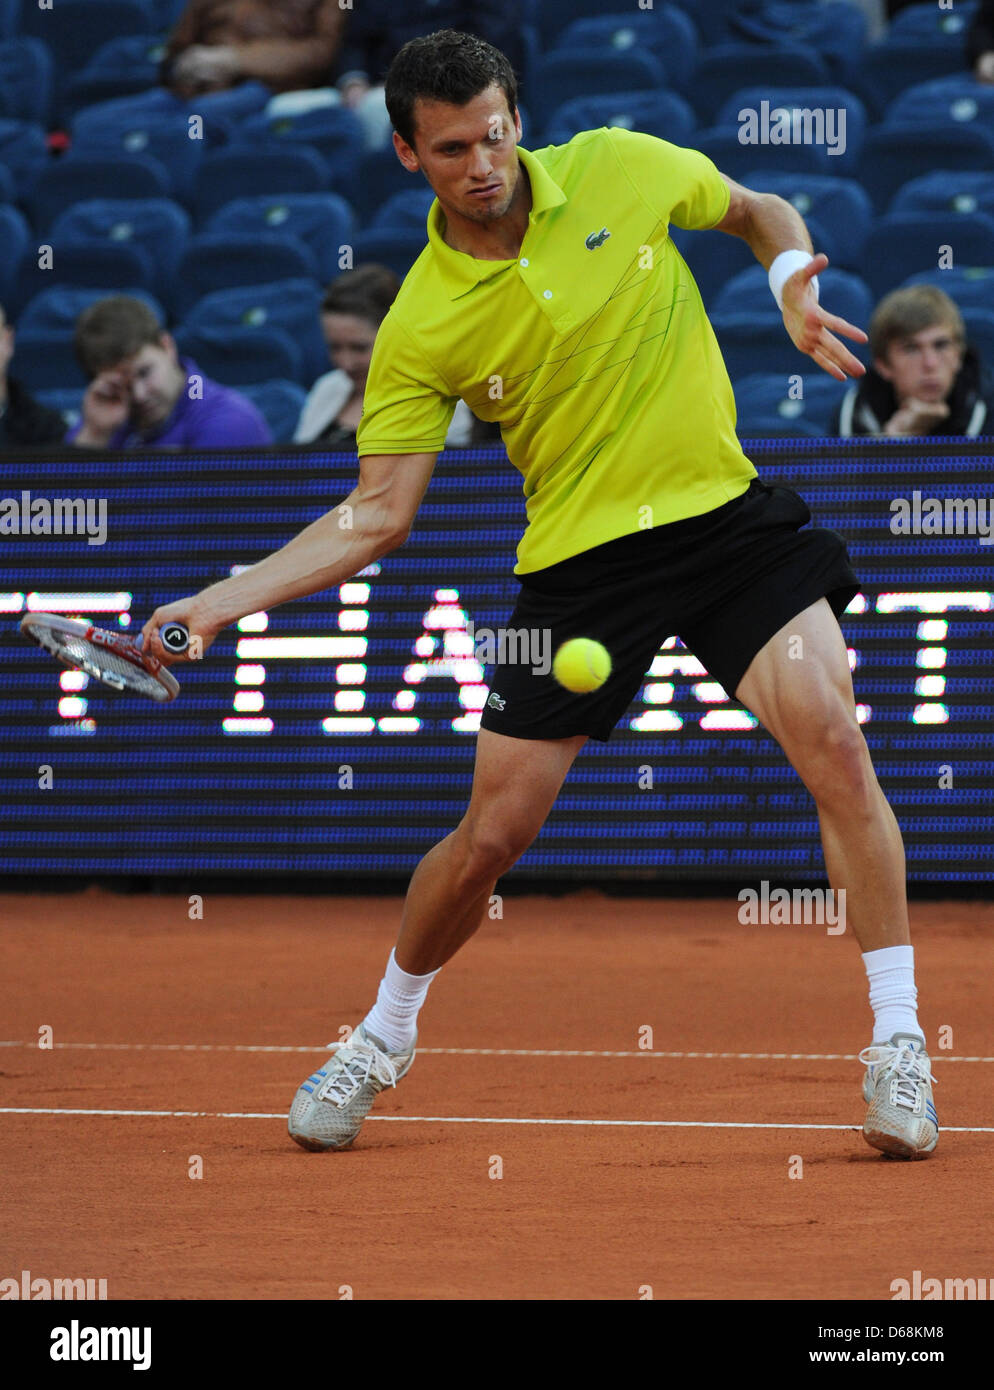 Tobias Kamke from Germany hits the ball during a tennis match against  Almagro from Spain at